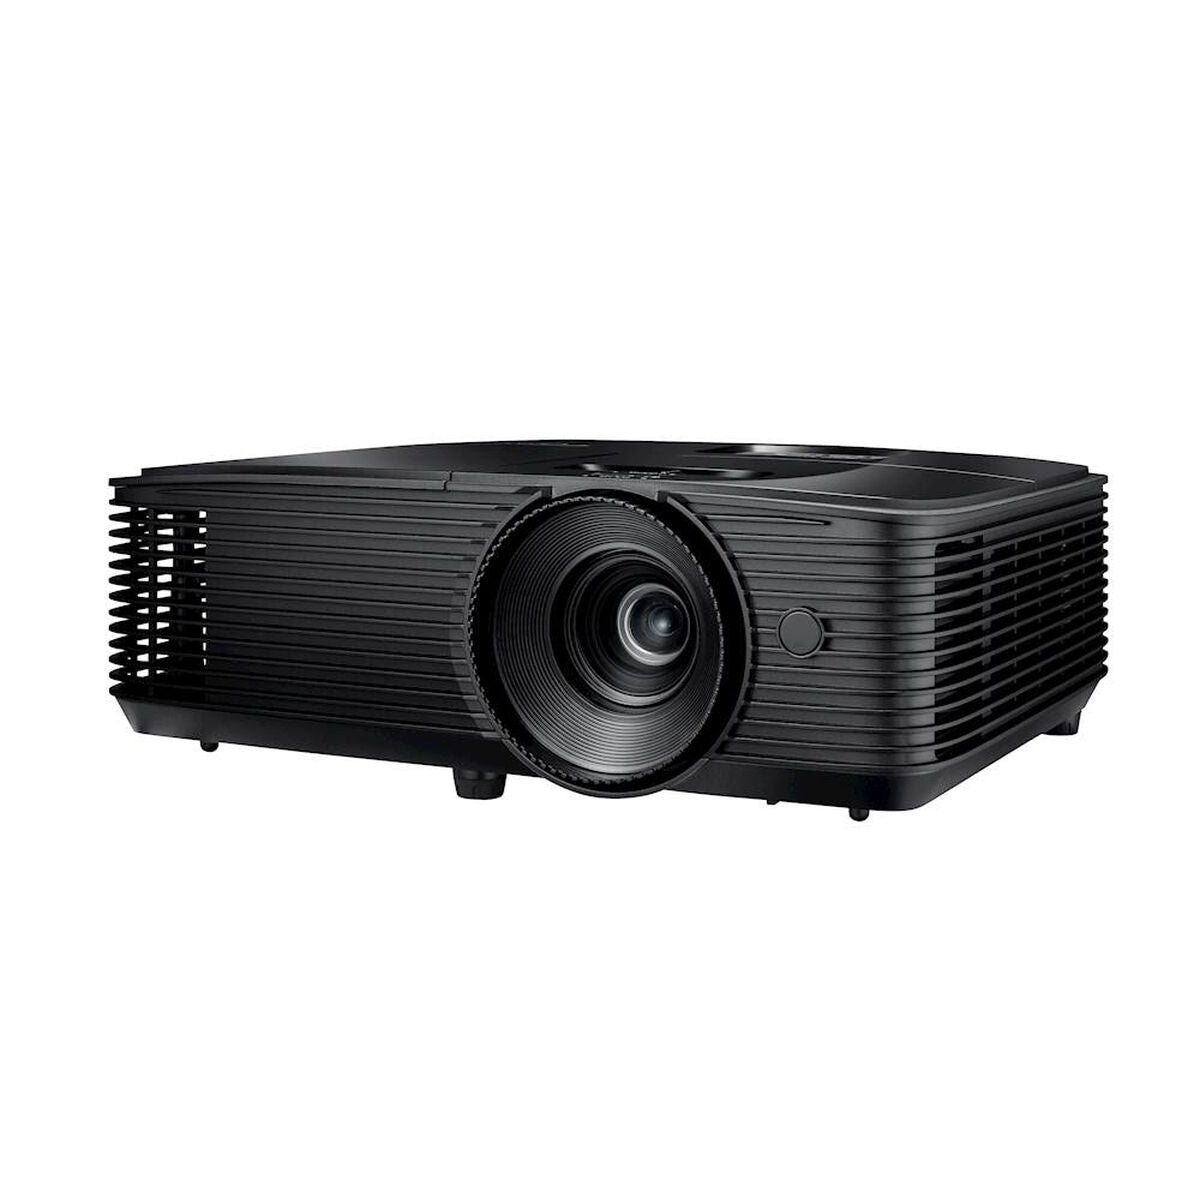 Projector Optoma H190X 3900 lm 32,2"-299,5", Optoma, Electronics, TV, Video and home cinema, projector-optoma-h190x-3900-lm-32-2-299-5, Brand_Optoma, category-reference-2609, category-reference-2642, category-reference-2947, category-reference-t-18805, category-reference-t-19653, cinema and television, computers / peripherals, Condition_NEW, entertainment, office, Price_500 - 600, RiotNook